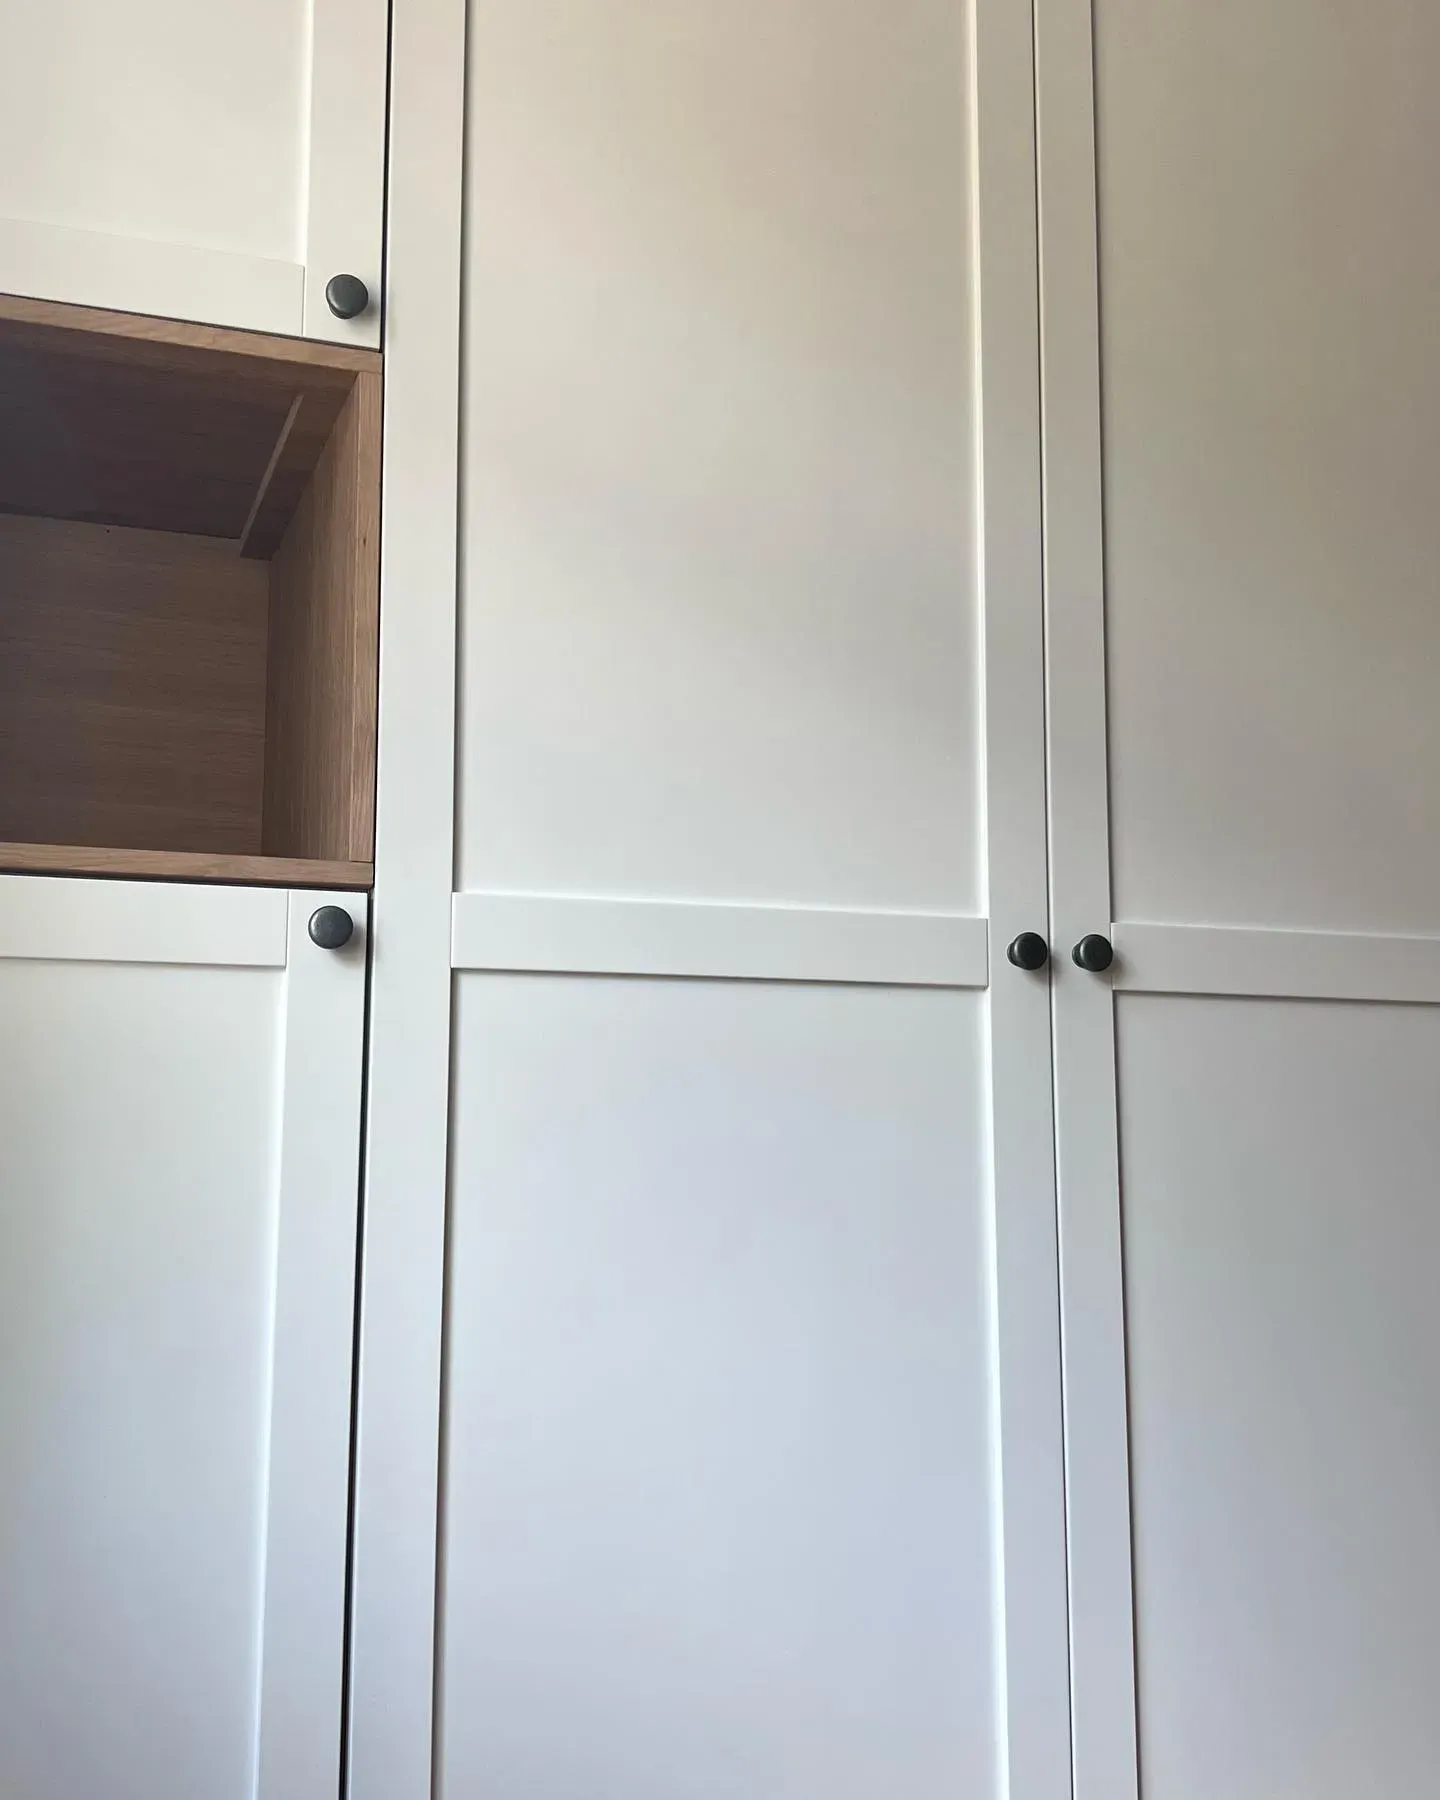 Farrow and Ball Wevet 273 kitchen cabinets